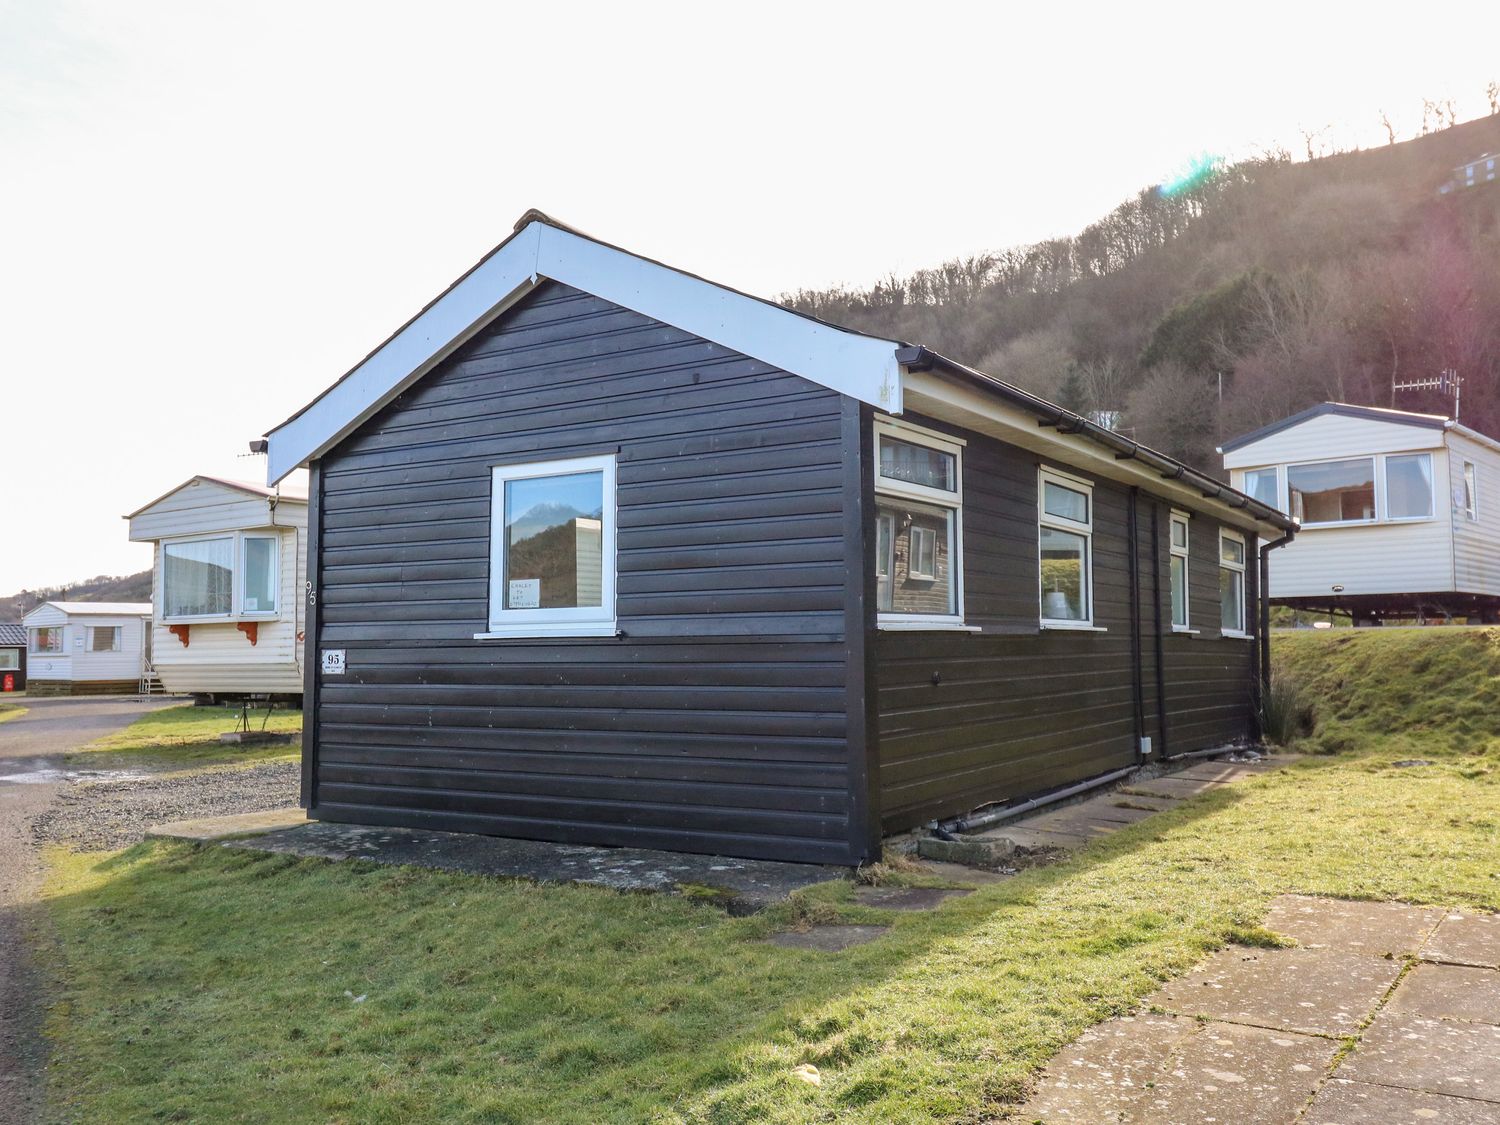 Chalet 95, Wales